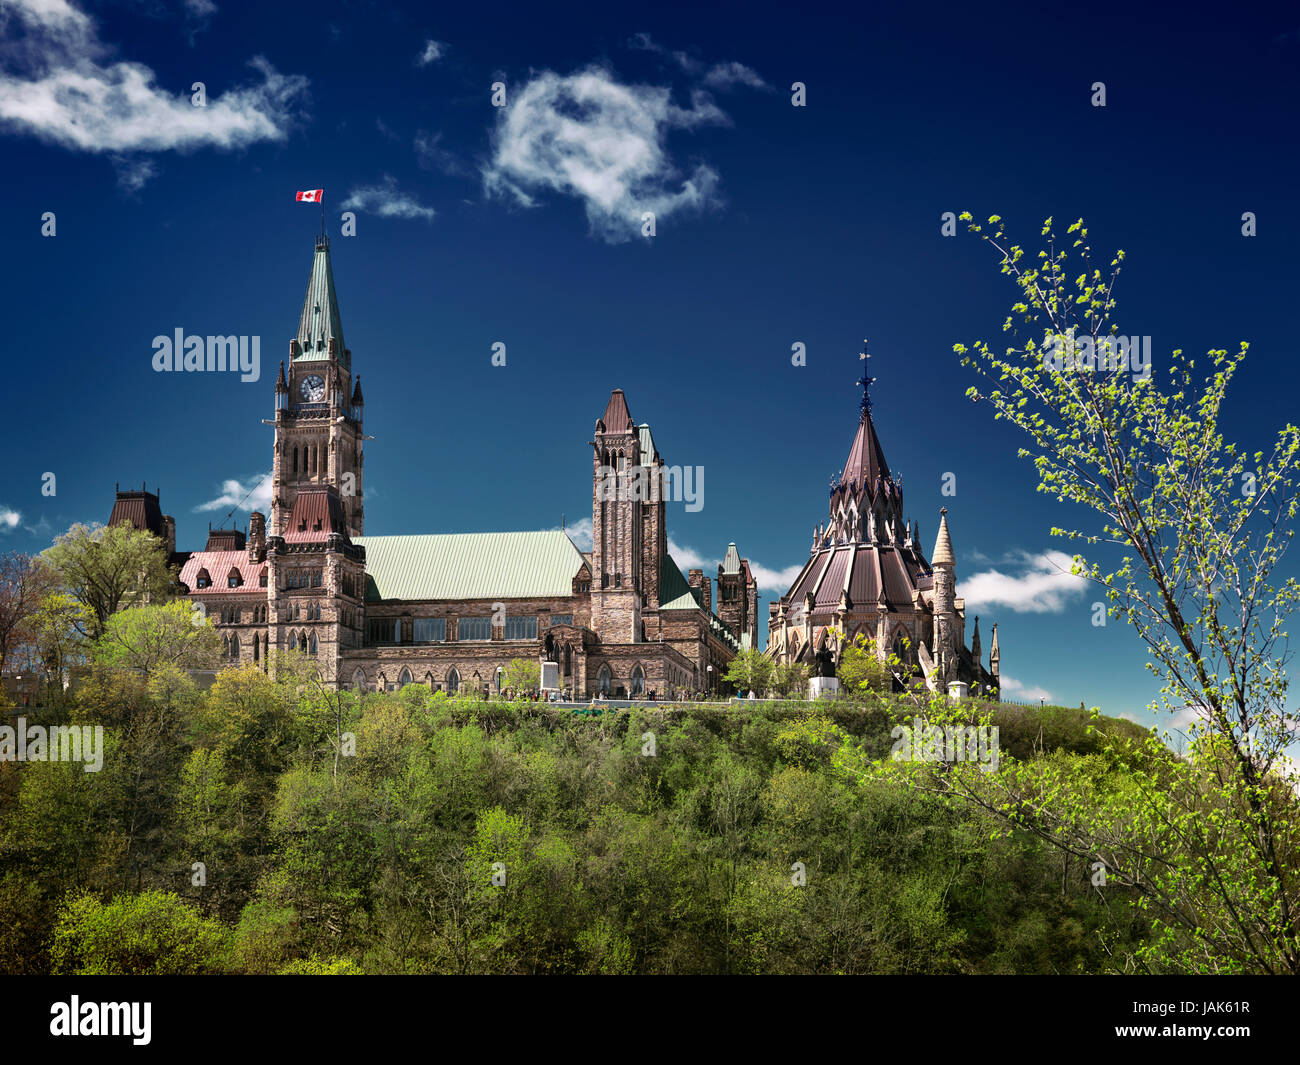 License available at MaximImages.com - The Parliament Hill Buildings and Ottawa river in Ottawa, Ontario, Canada on a sunny springtime day Stock Photo